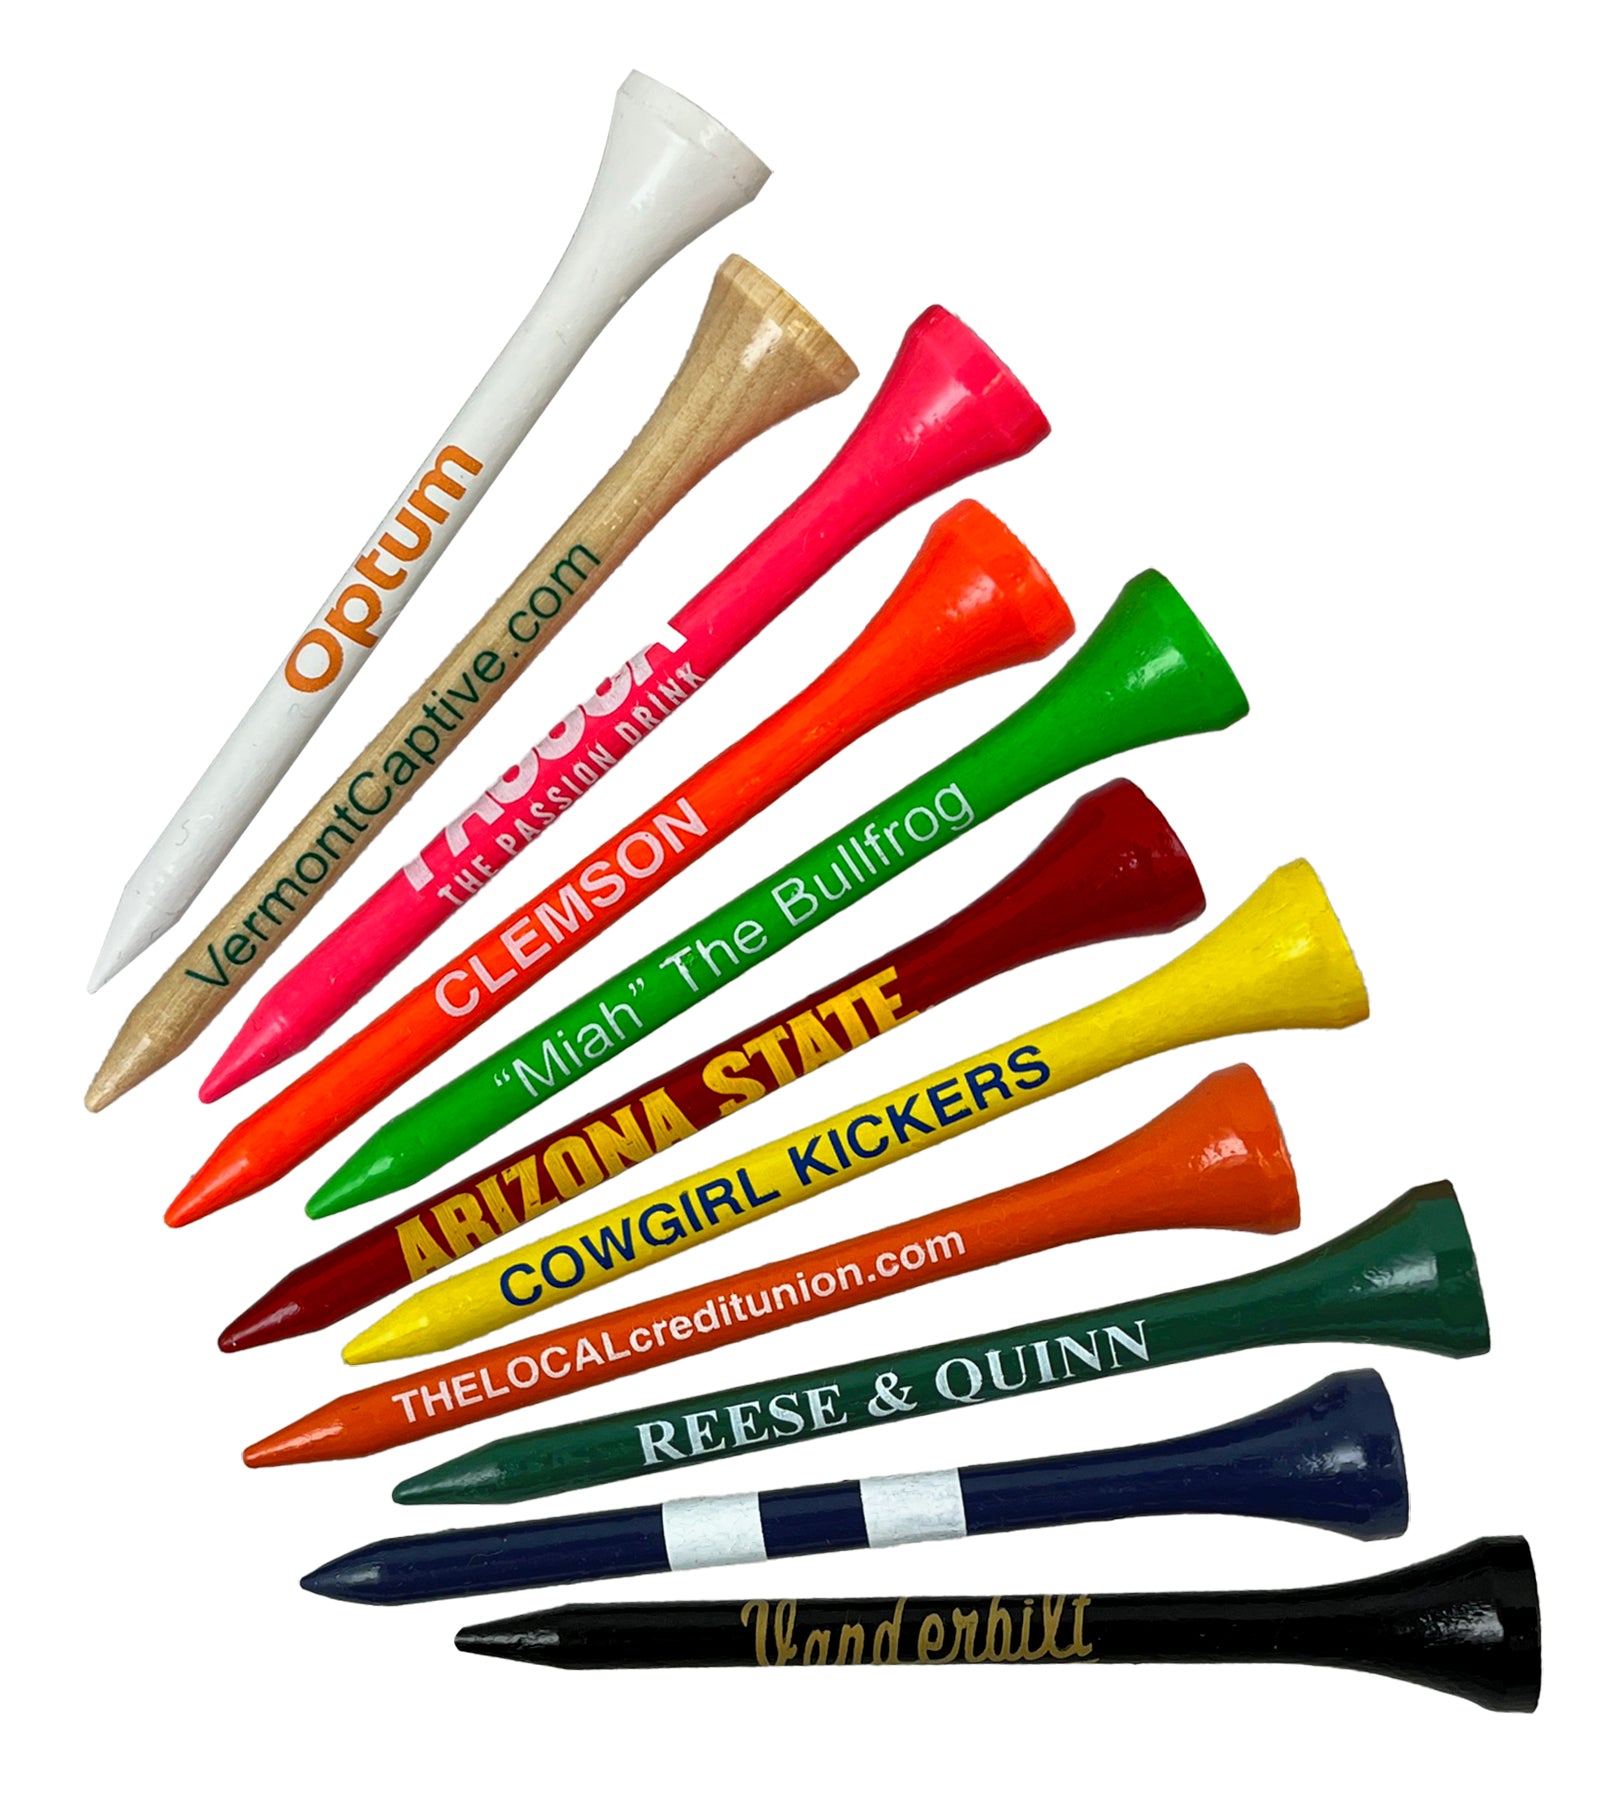 3 1/4" Personalized Wood Golf Tees